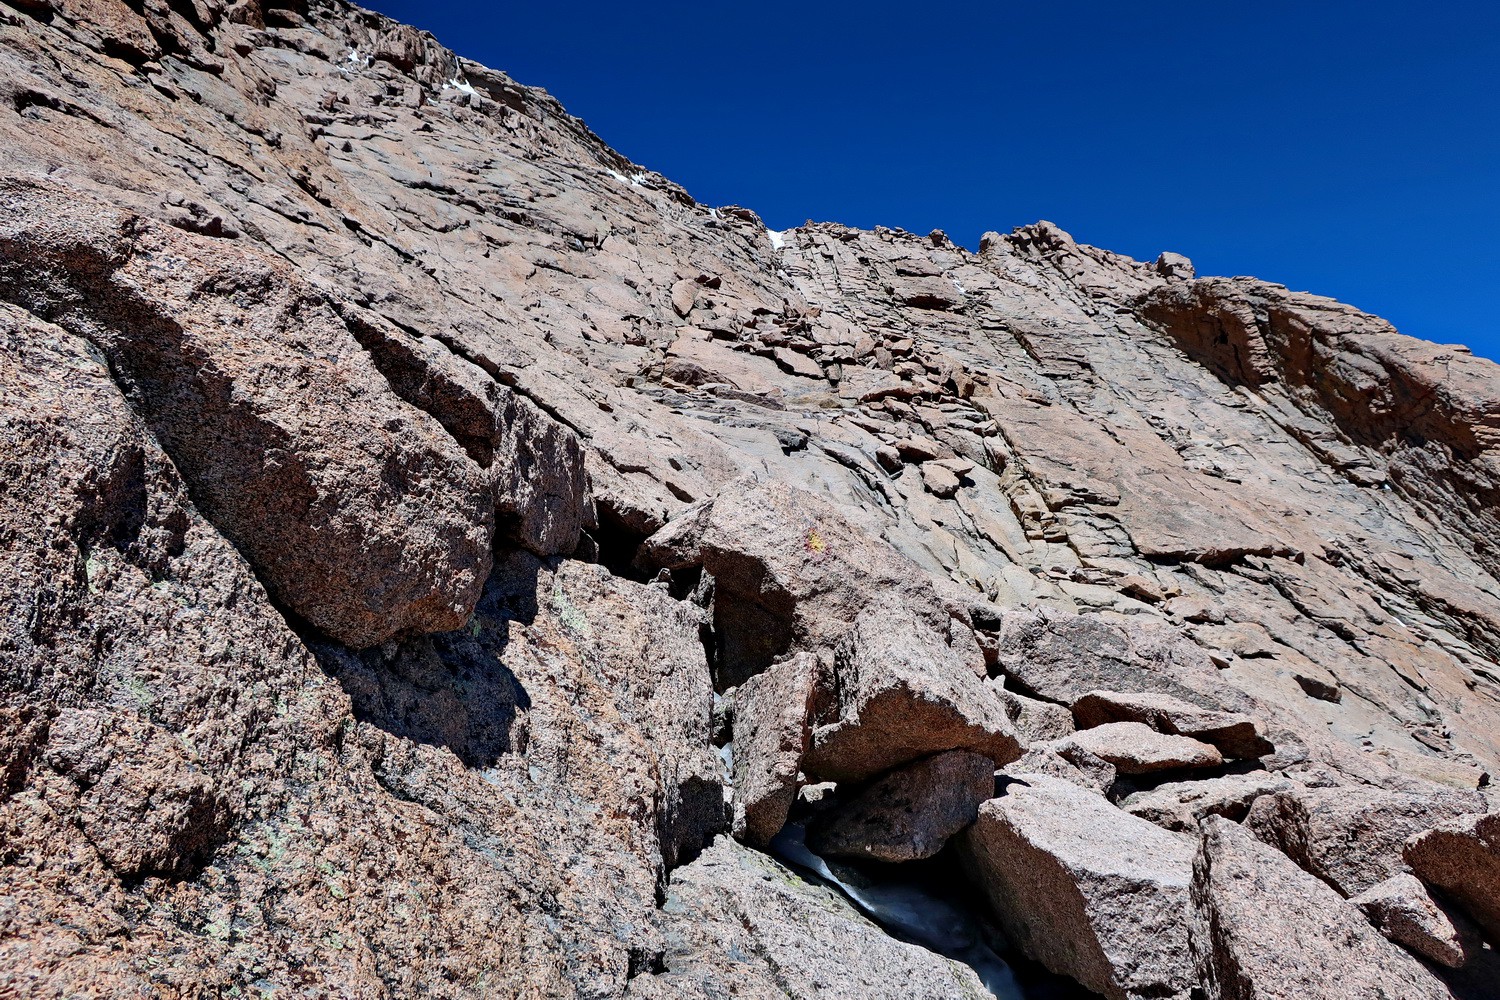 South face of Longs Peak which provides access to its summit